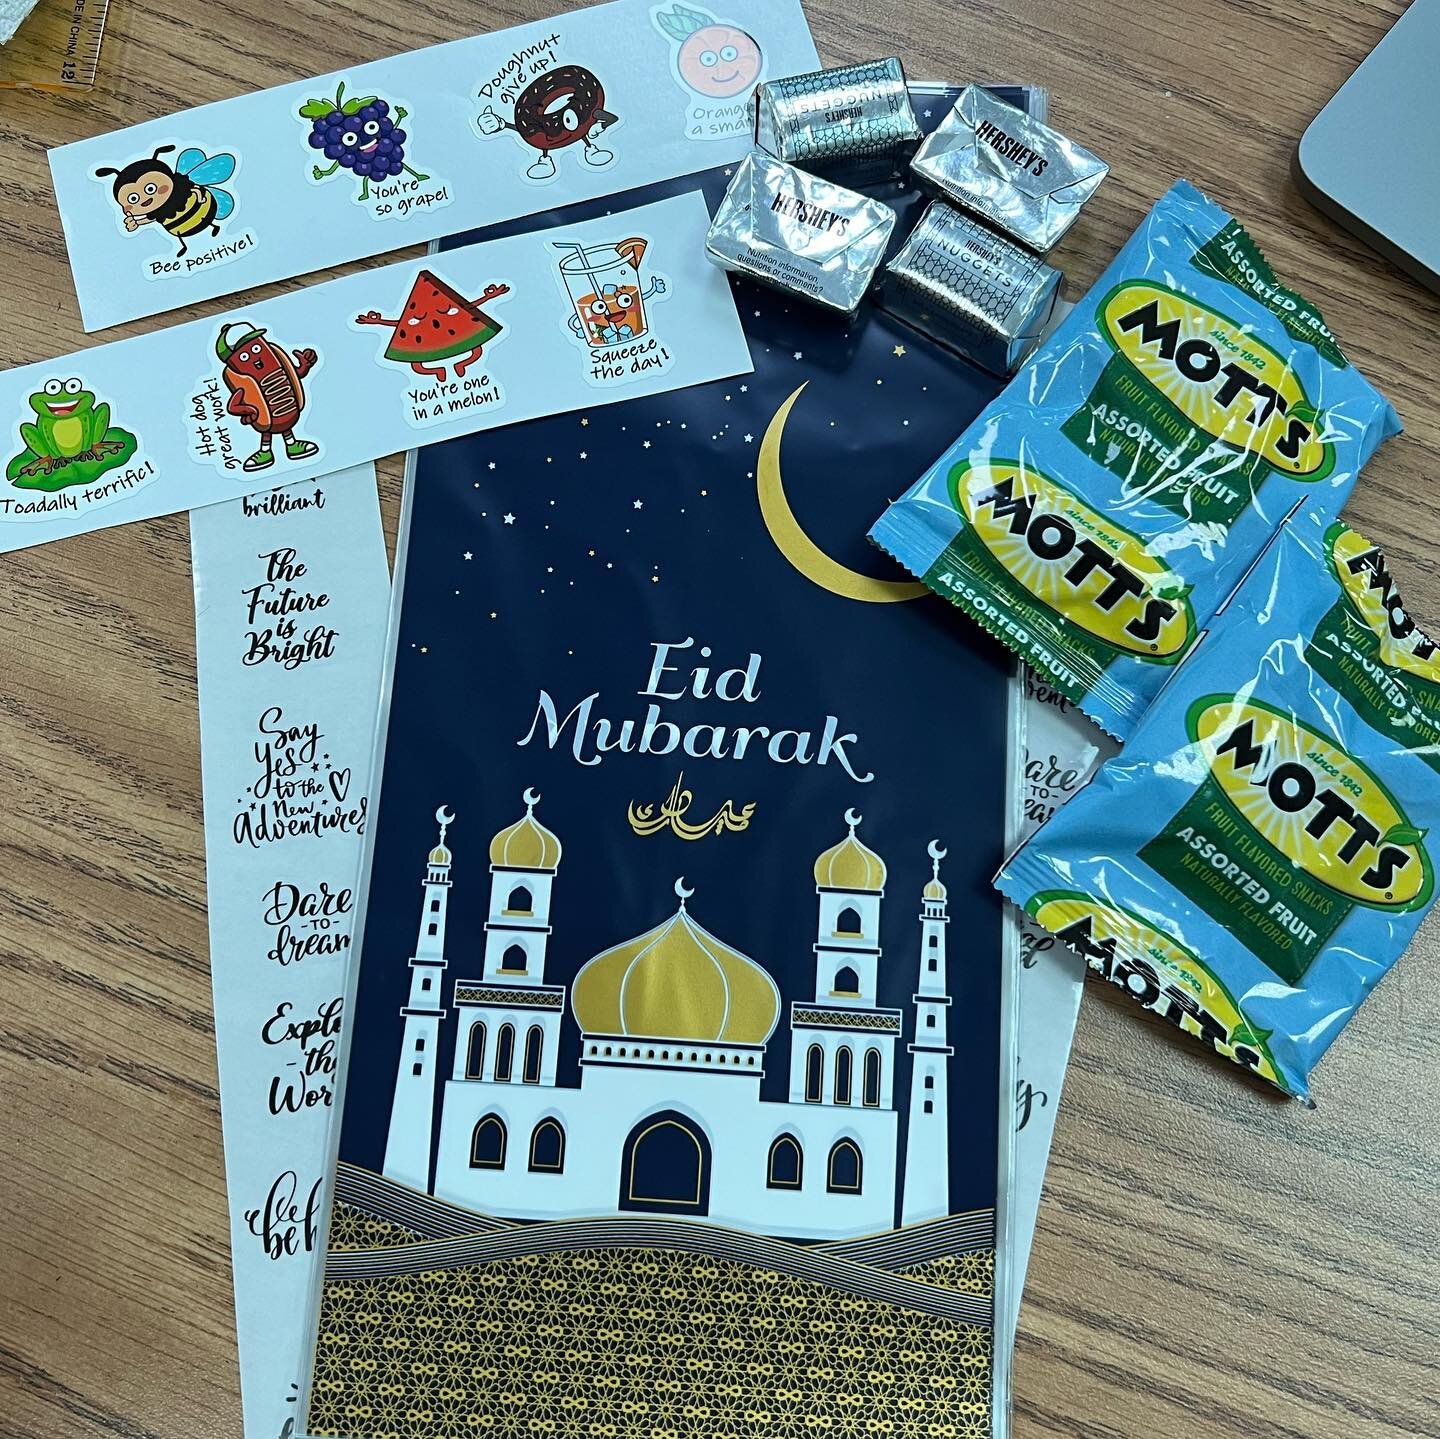 Making 80+ Eid goodie bags for the entire faculty and staff.  A bit late, but better than never 🤷🏽&zwj;♂️ #EidMubarak